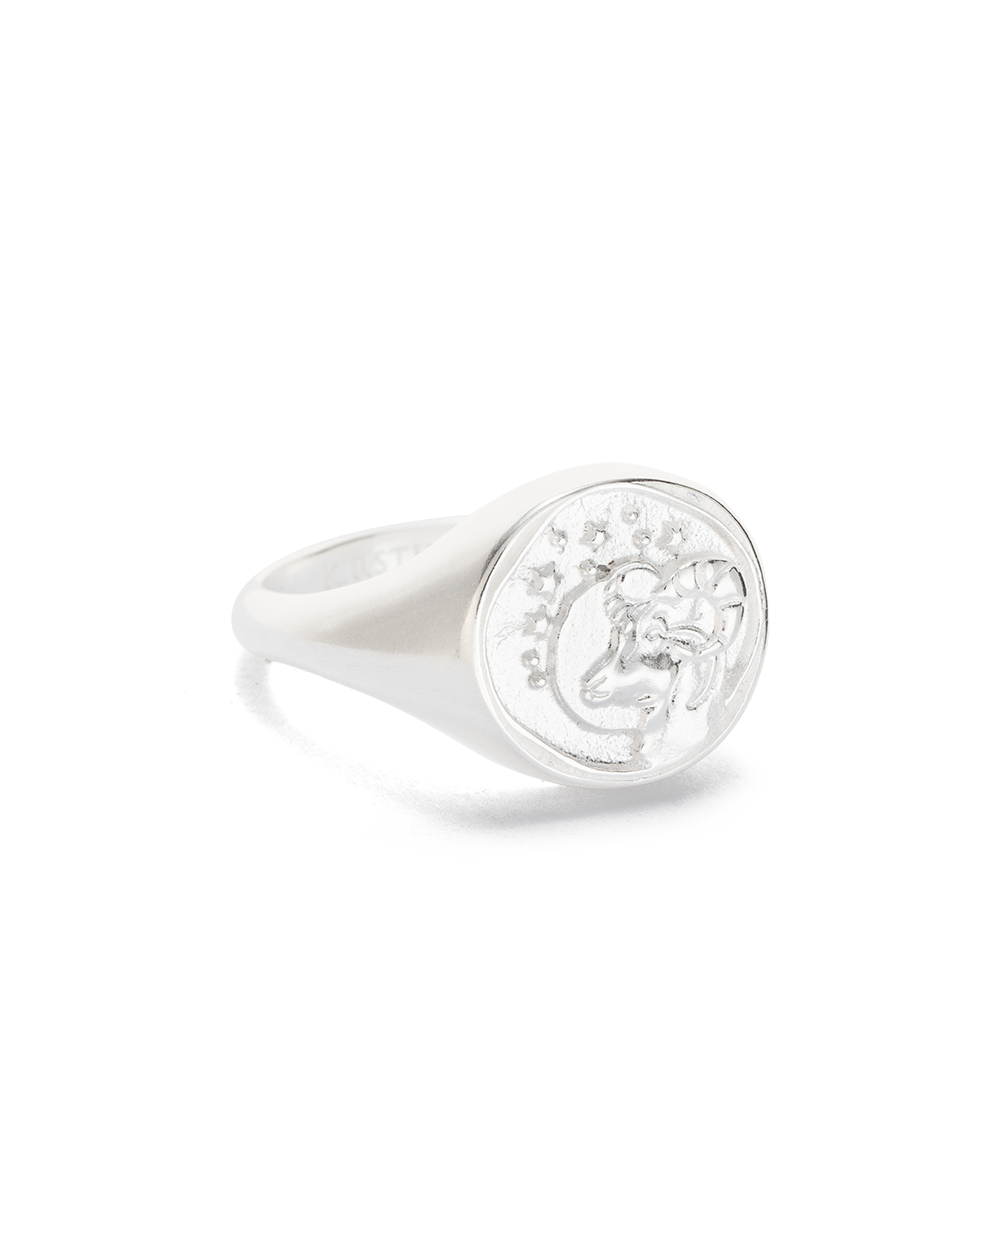 ARIES SIGNET RING (STERLING SILVER) - IMAGE 1